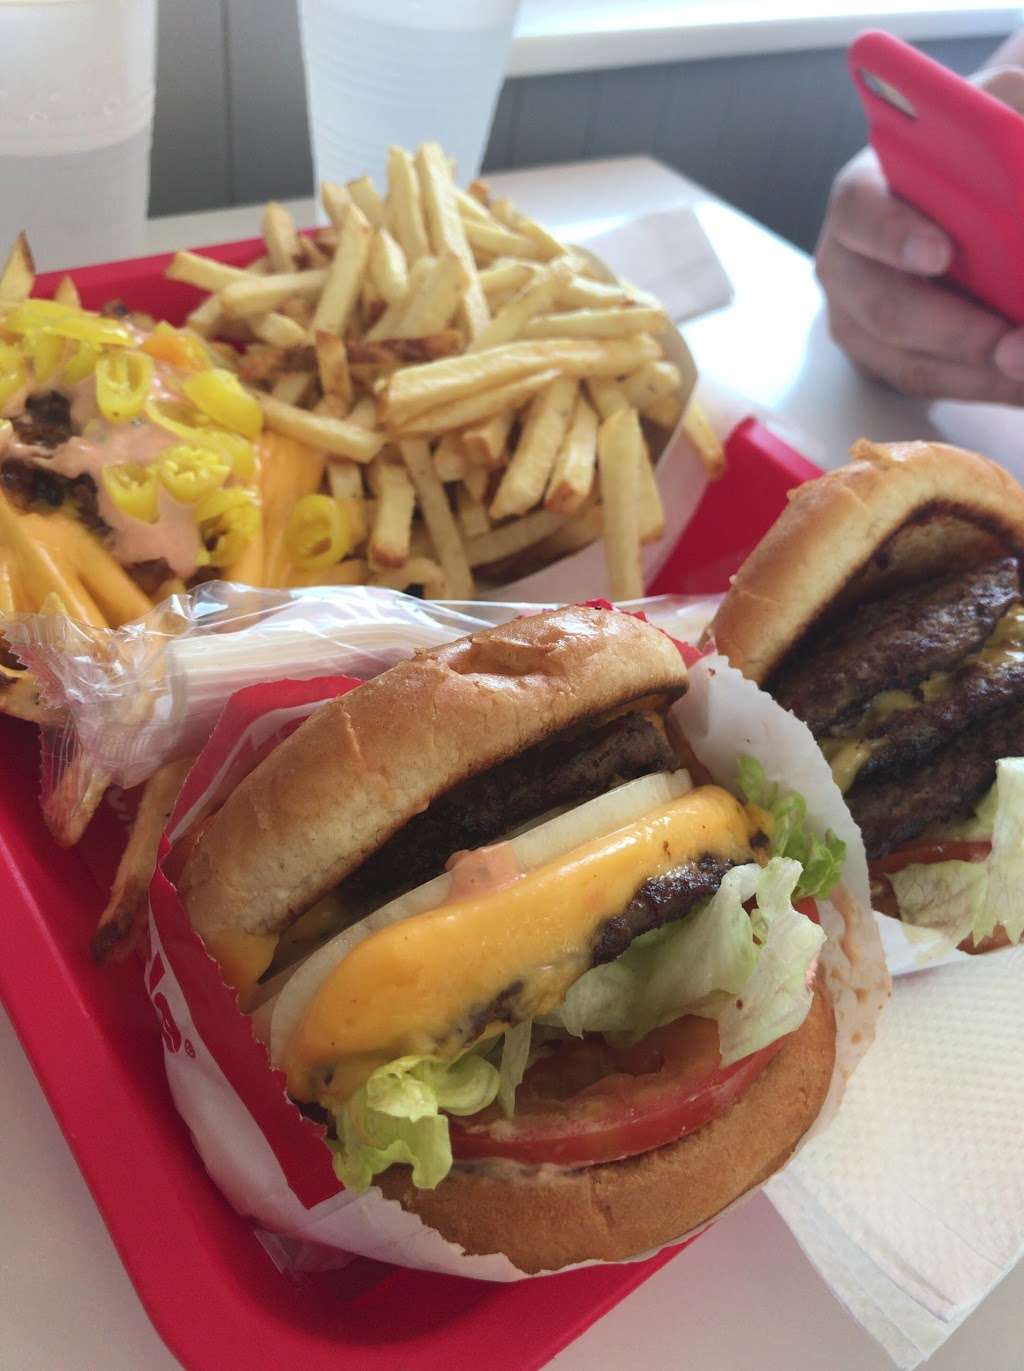 In-N-Out Burger | 20150 Hawthorne Blvd, Torrance, CA 90503 | Phone: (800) 786-1000